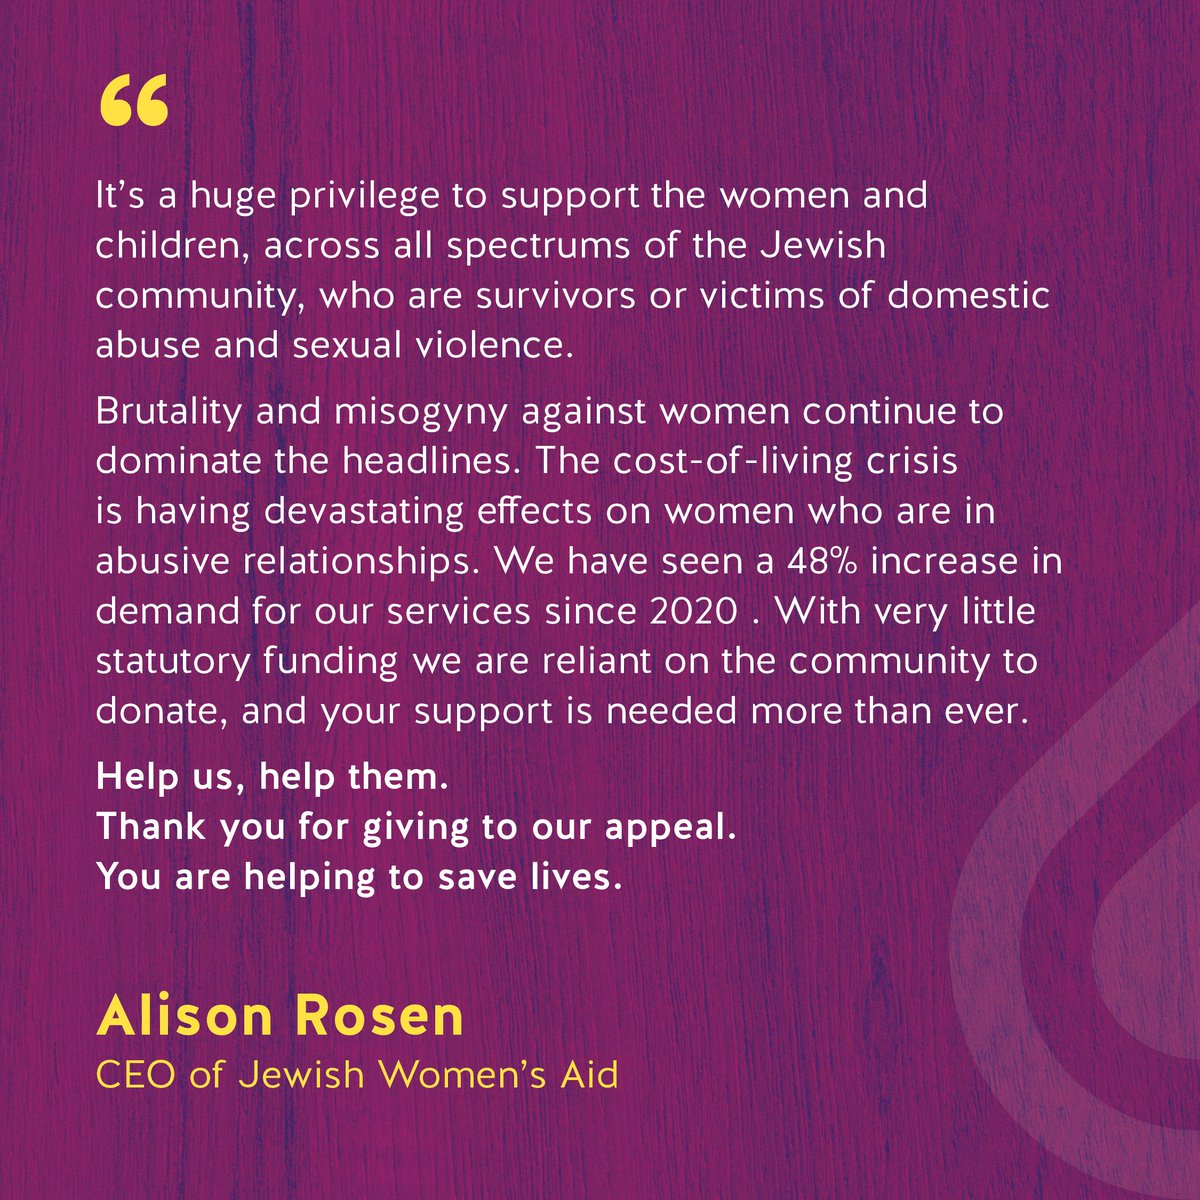 A message from our new Chief Executive, Alison Rosen. 

Please donate to our appeal here: 

jwa.org.uk/Appeal/help-us…

#helpushelpher #EndViolenceAgainstWomen